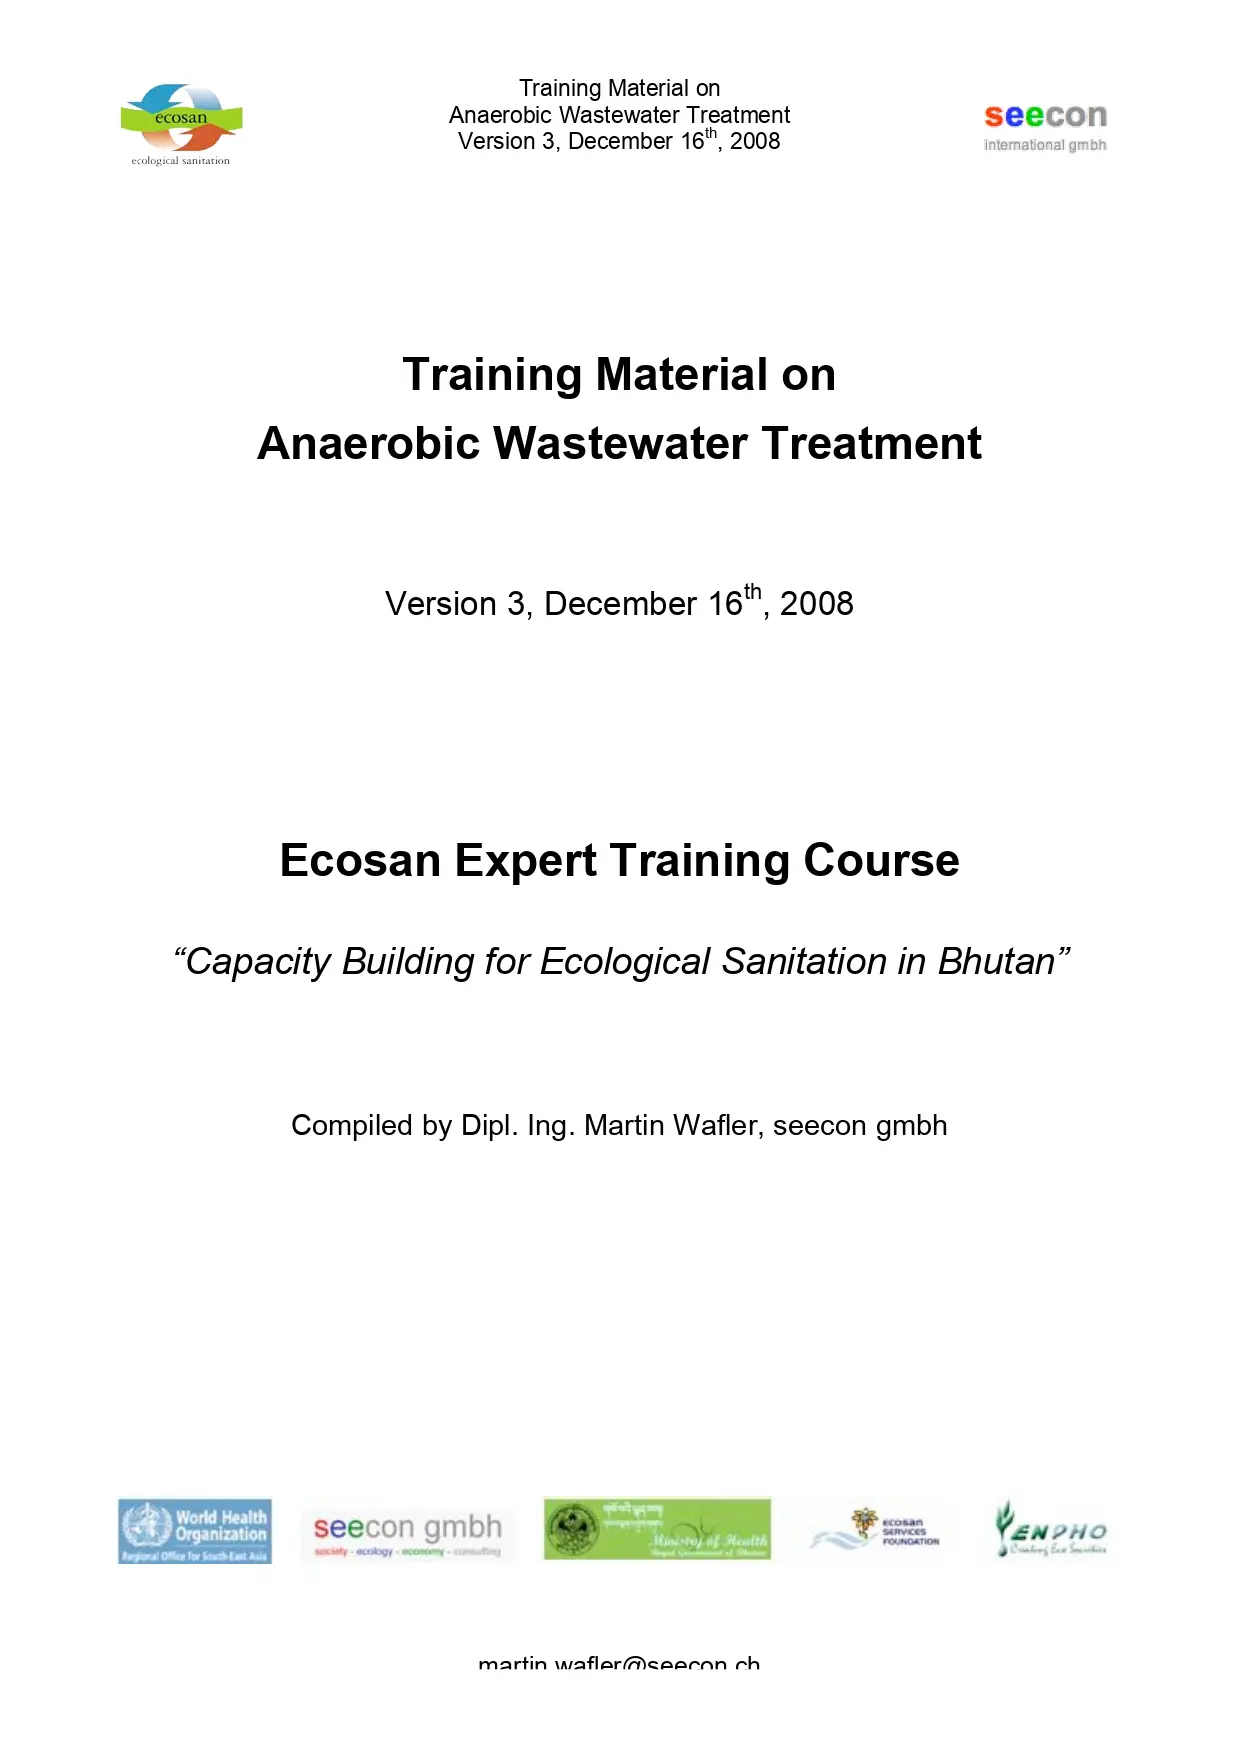 Training Material on Anaerobic Wastewater Treatment